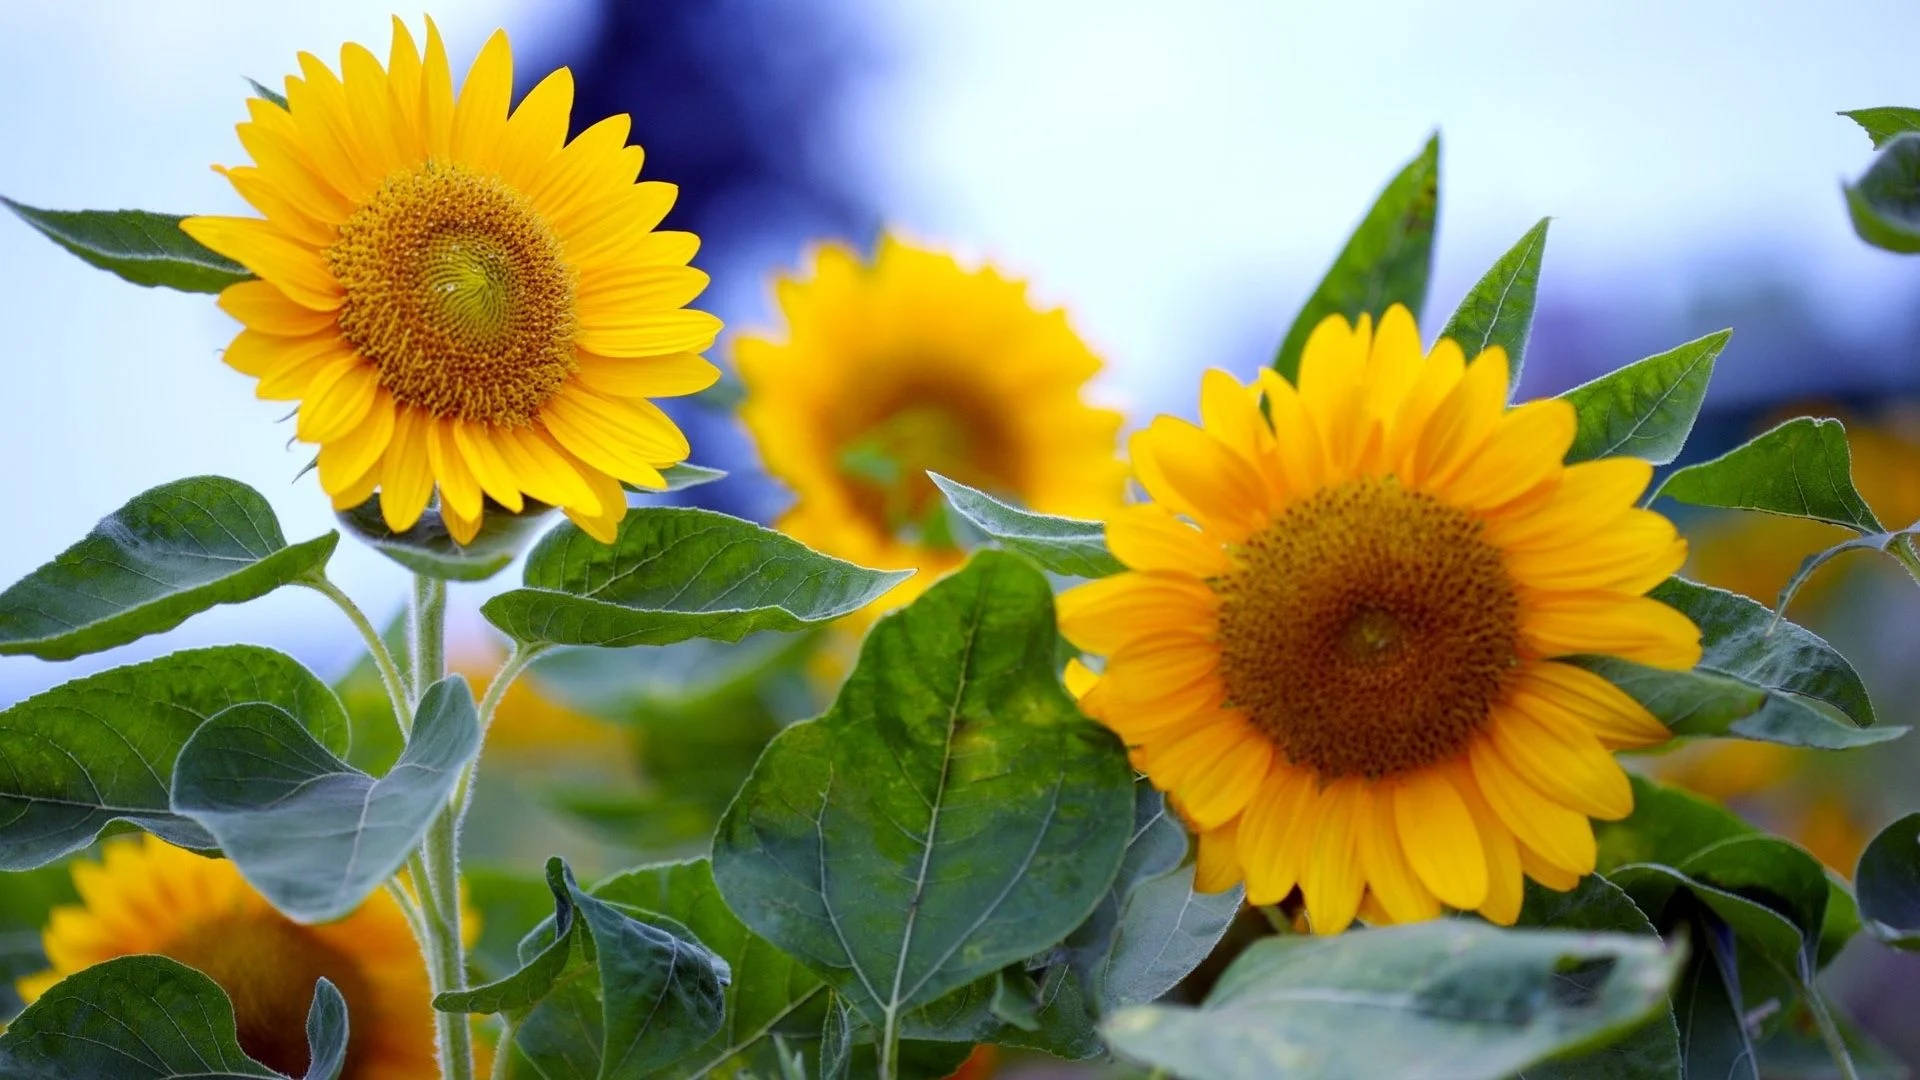 Whimsical Sunflower With Leaves Wallpaper